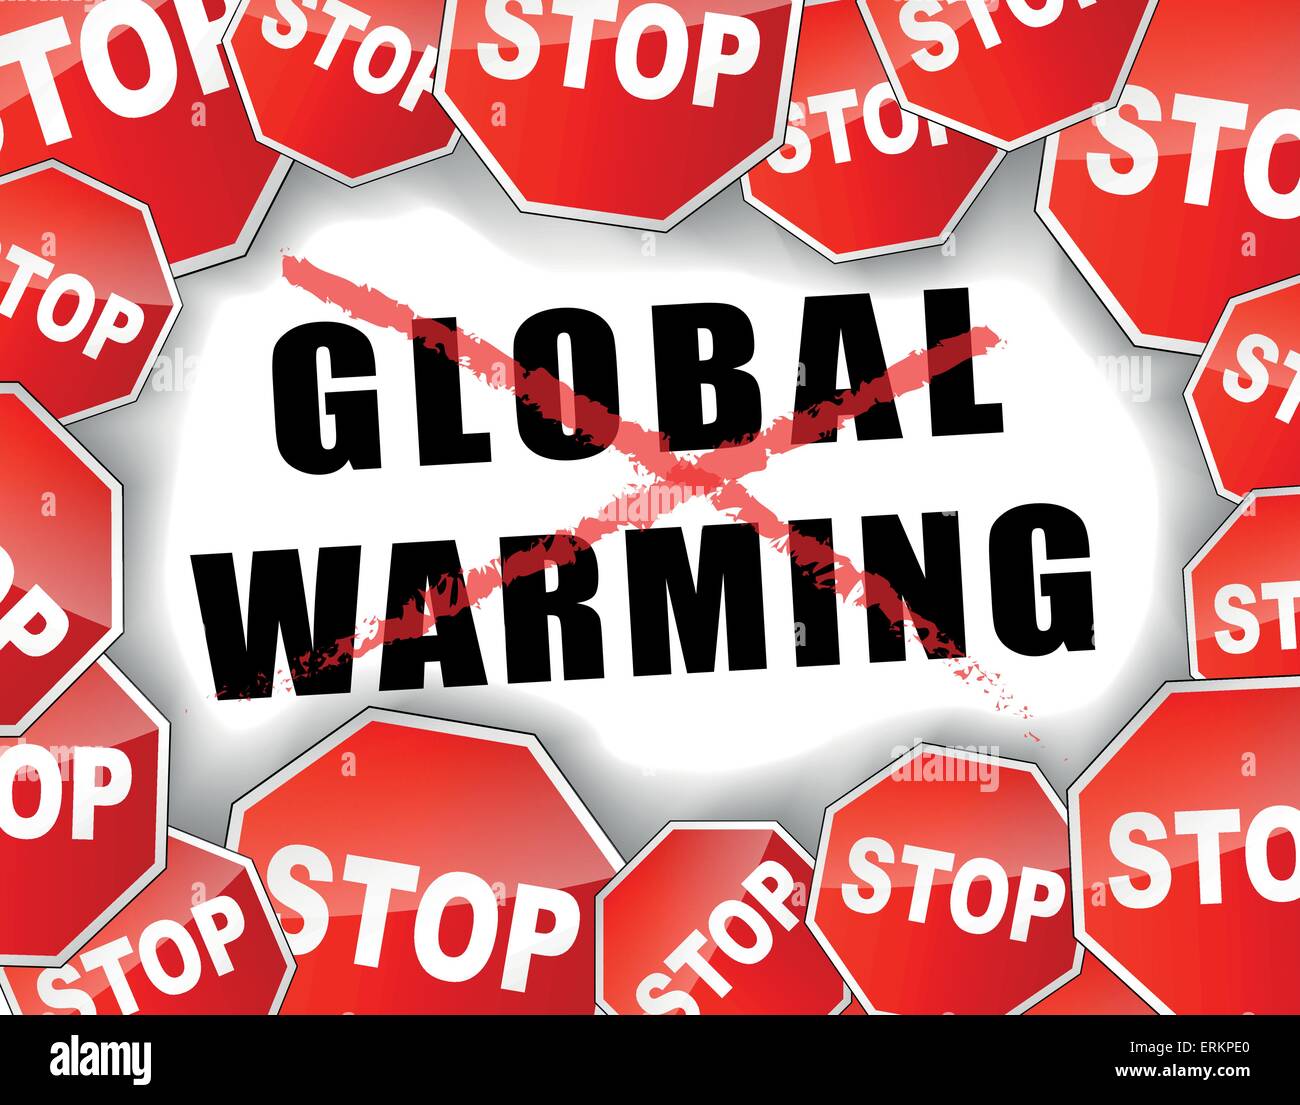 Vector illustration of stop global warming background concept Stock Vector